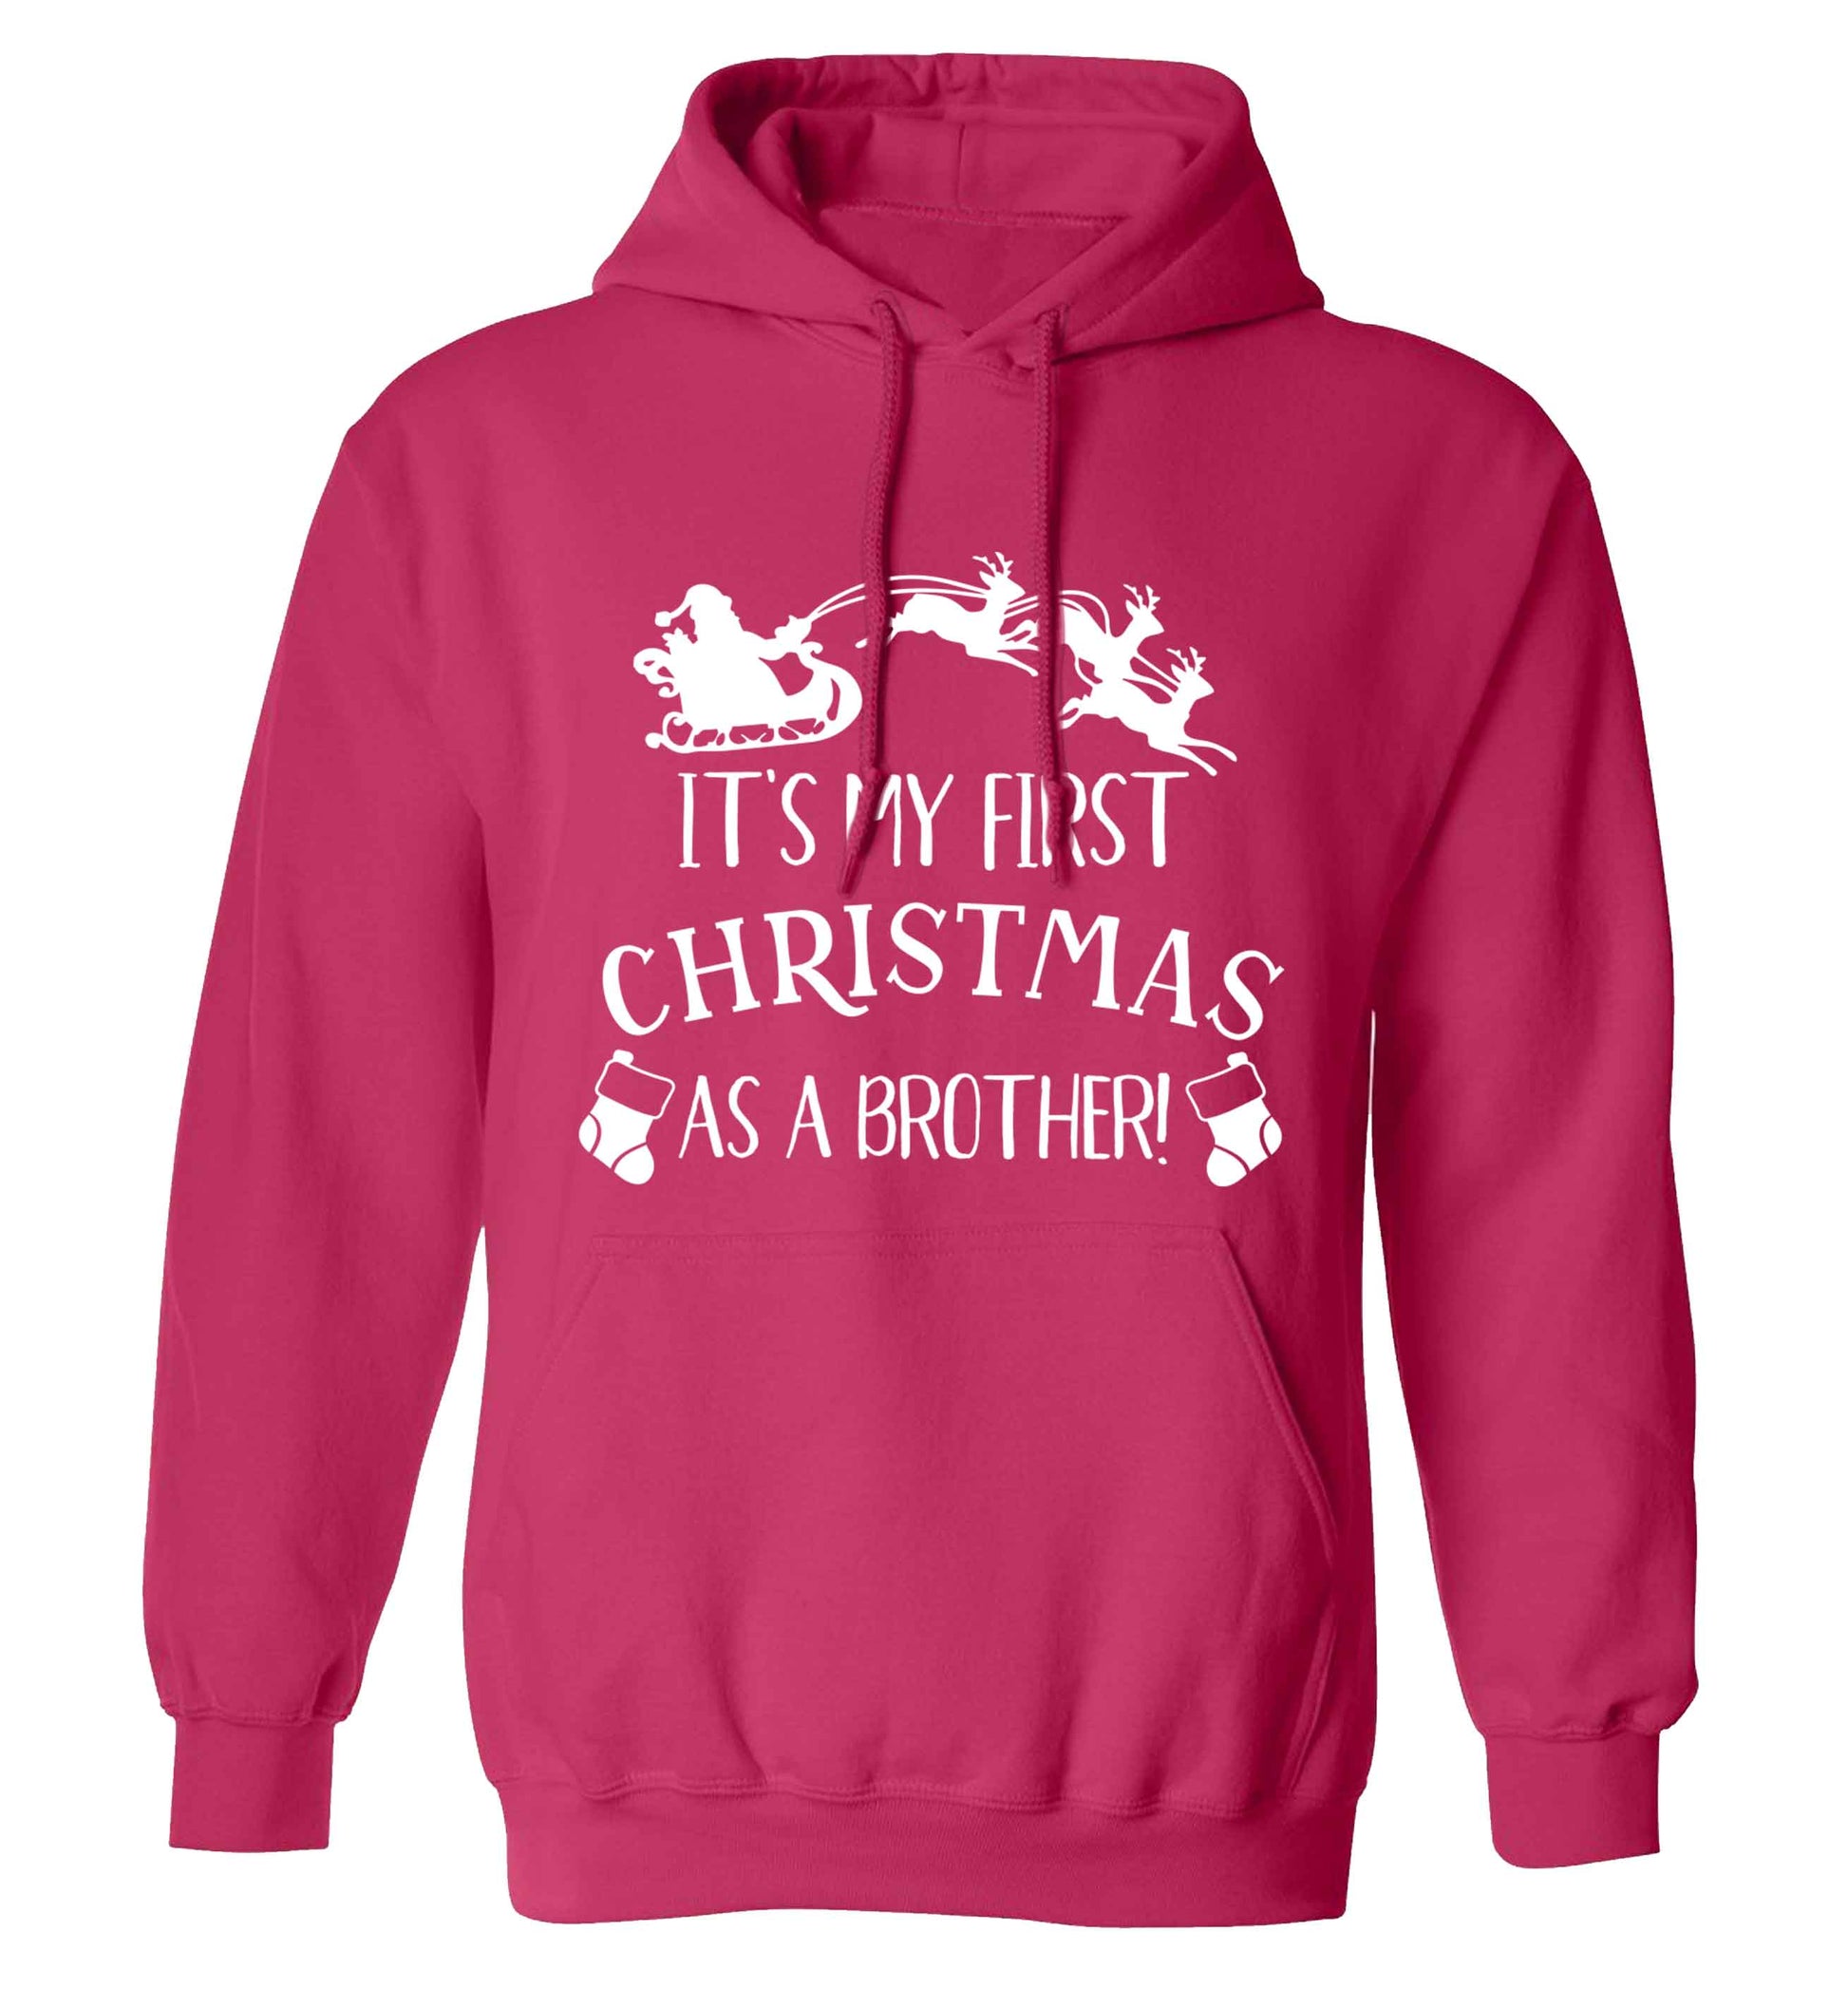 It's my first Christmas as a brother! adults unisex pink hoodie 2XL